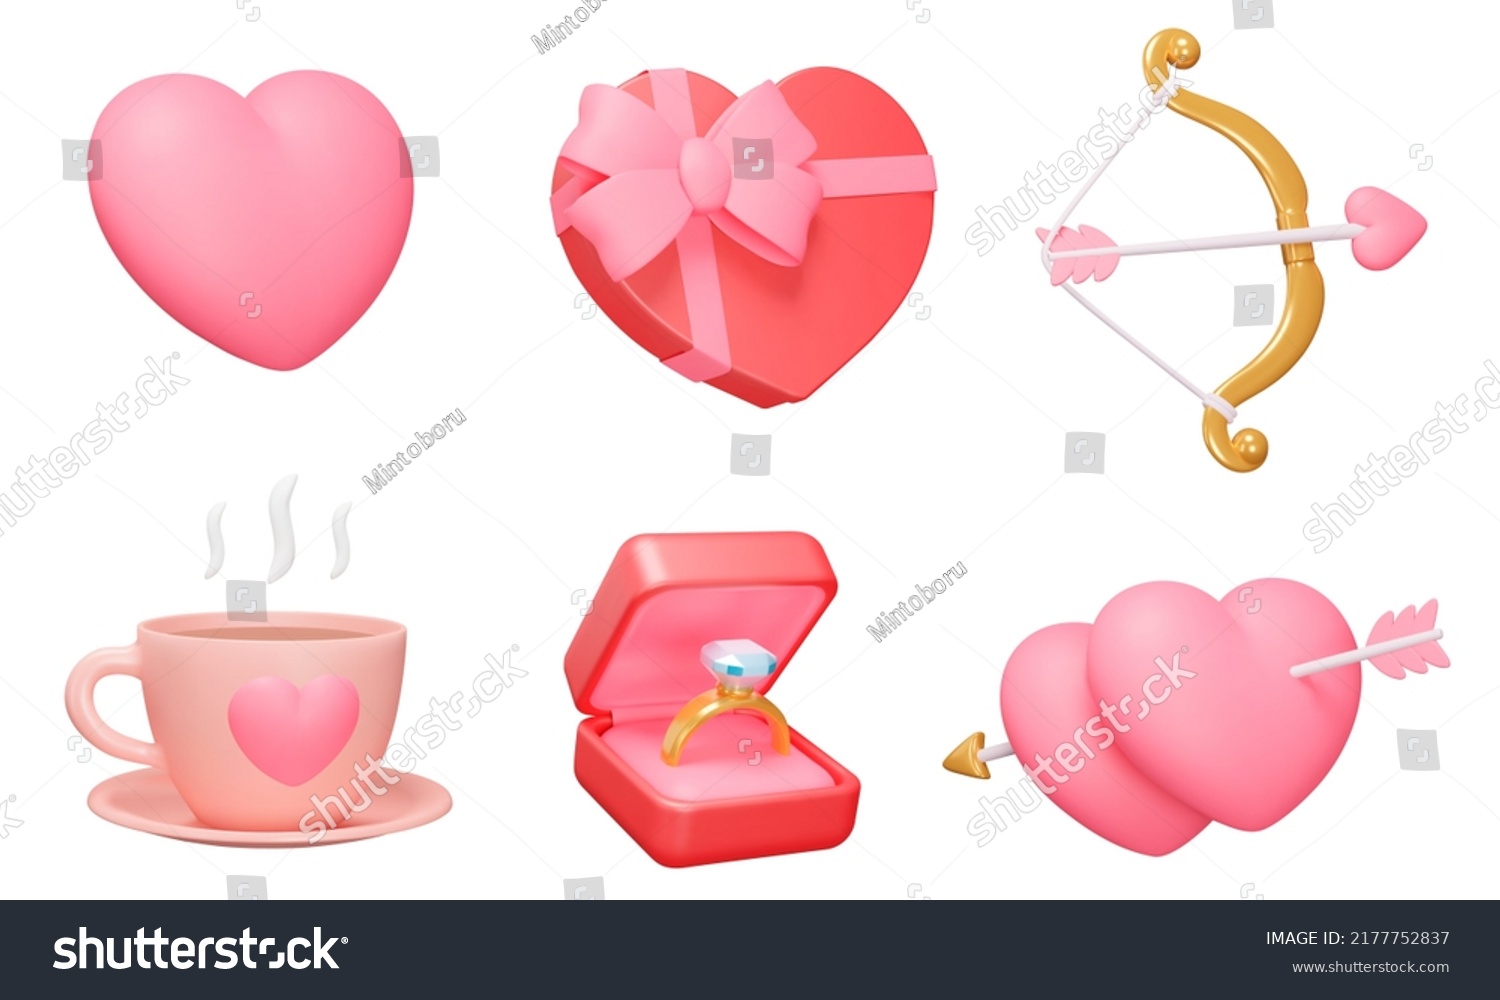 SVG of Love 3d icon set. Valentine's Day, Romance. Romantic date and marriage proposal. Hearts, Gifts. Isolated icons, objects on a transparent background svg